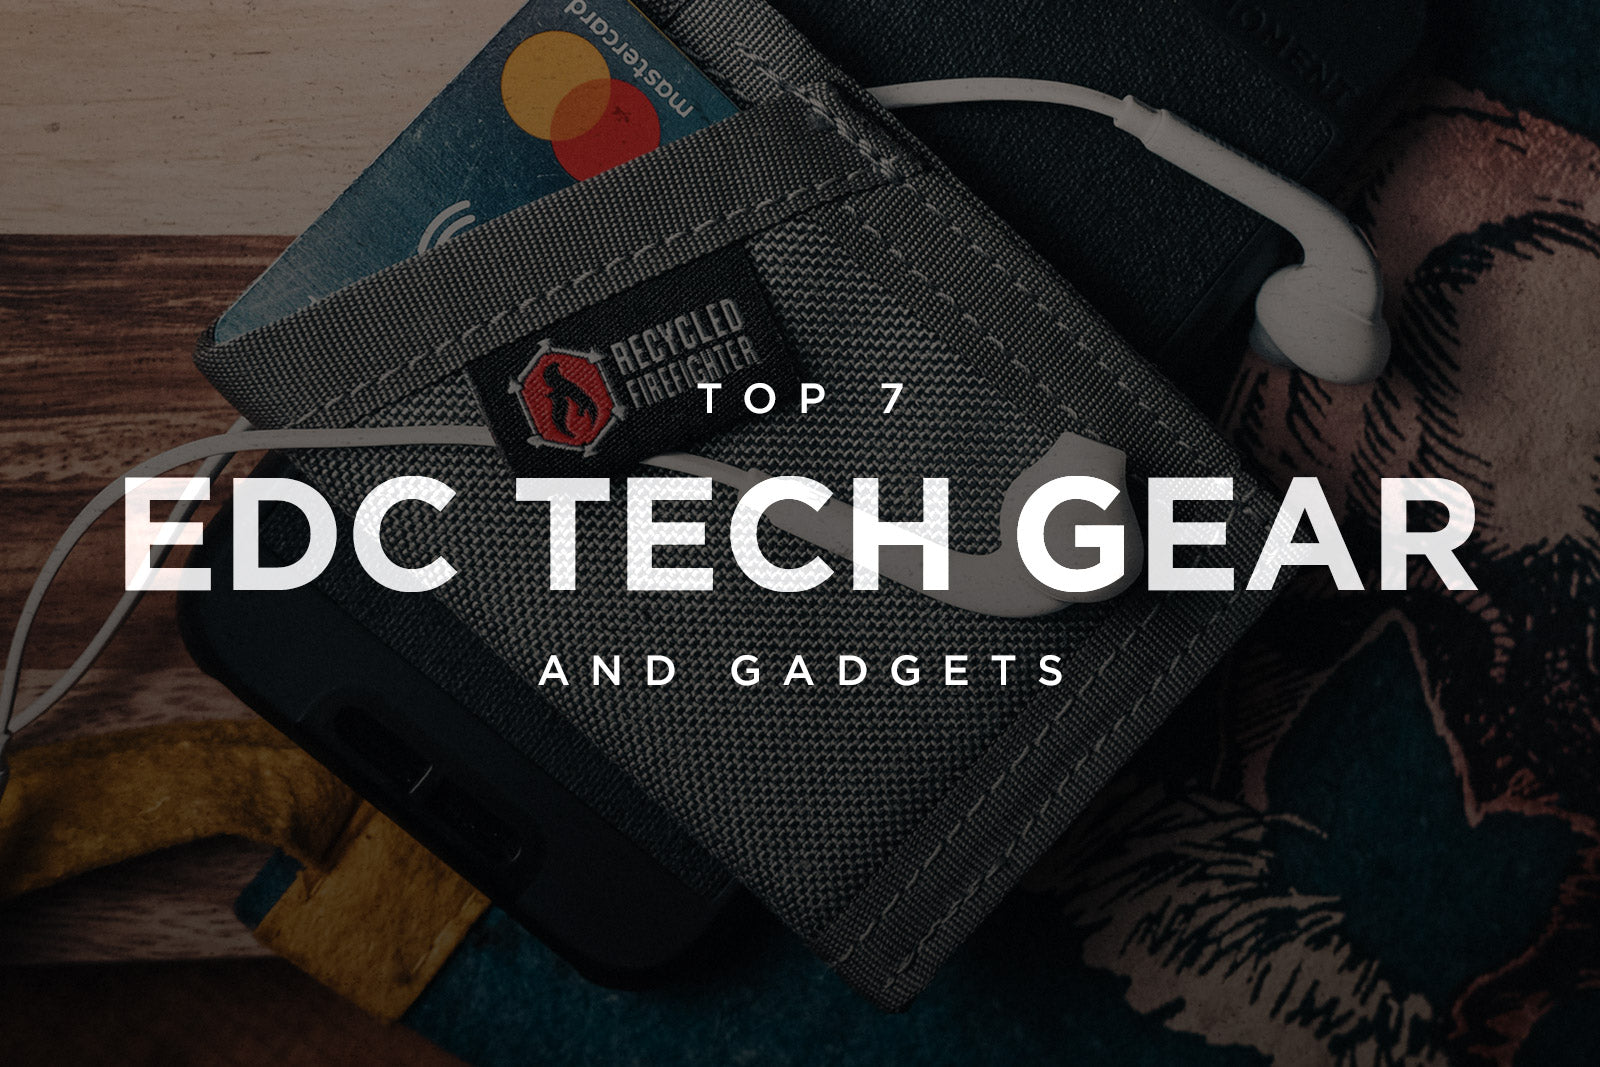 Top 7 List of The Best EDC Tech Gear & Gadgets – Recycled Firefighter